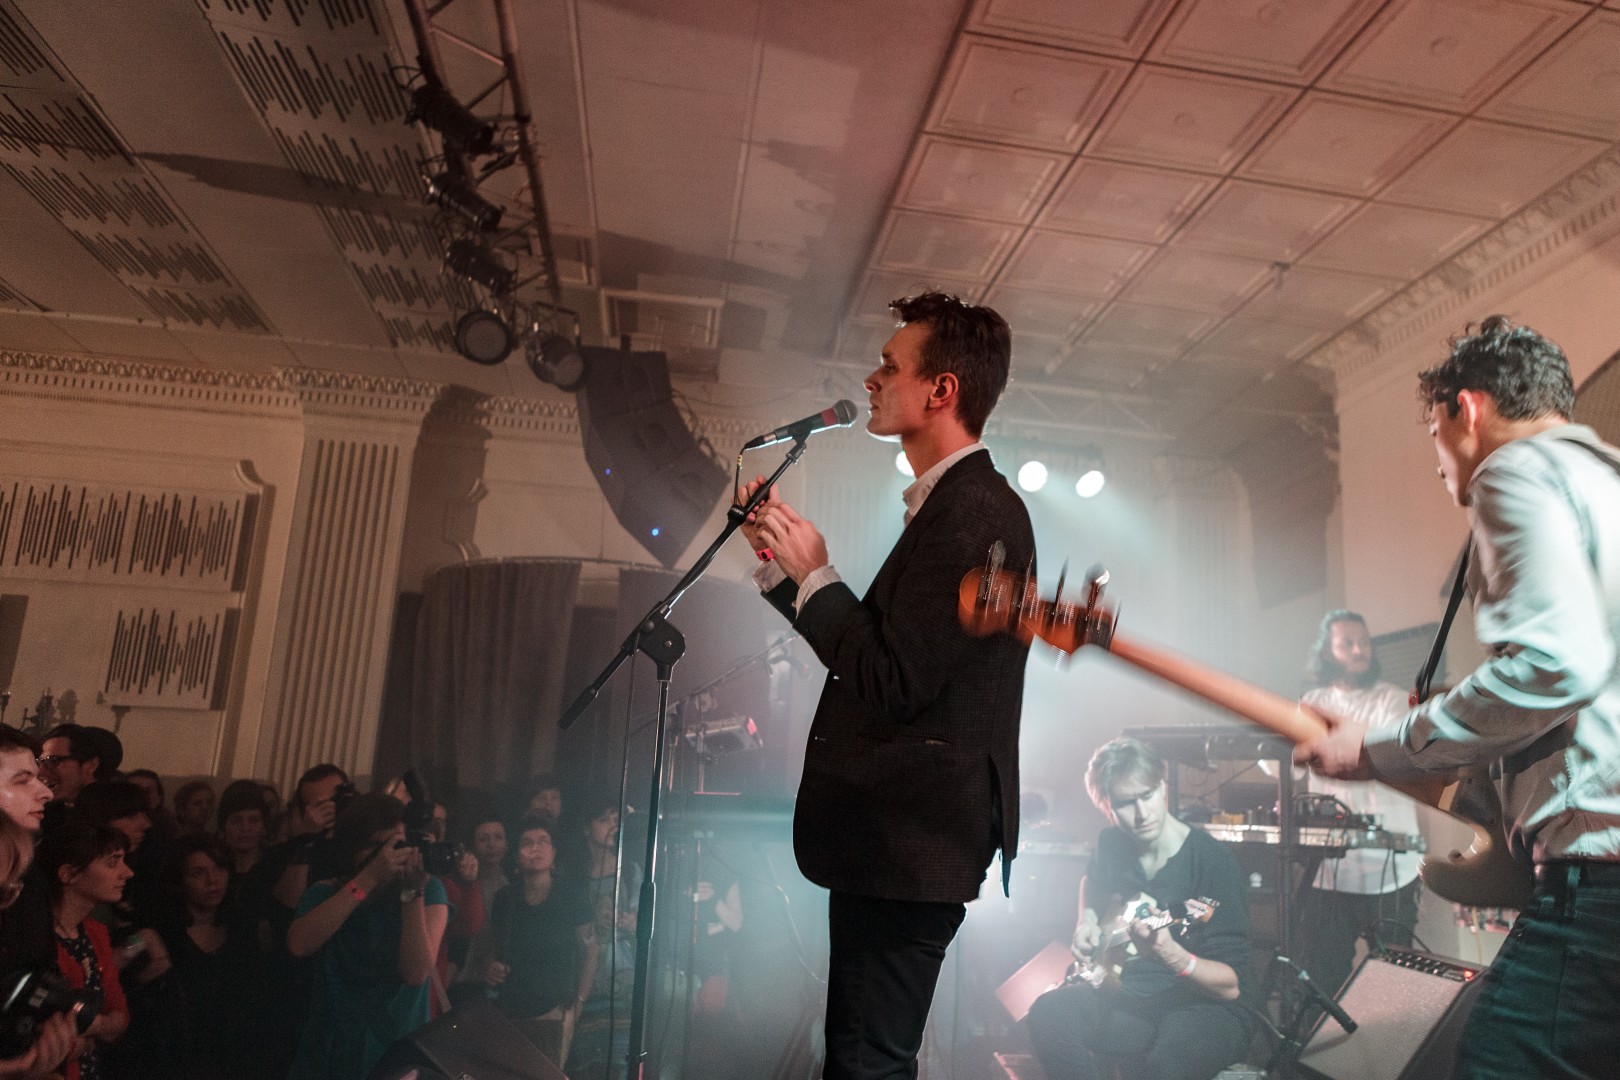 Efterklang at Control Club in Bucharest on November 14, 2013 (32ac6cbb25)